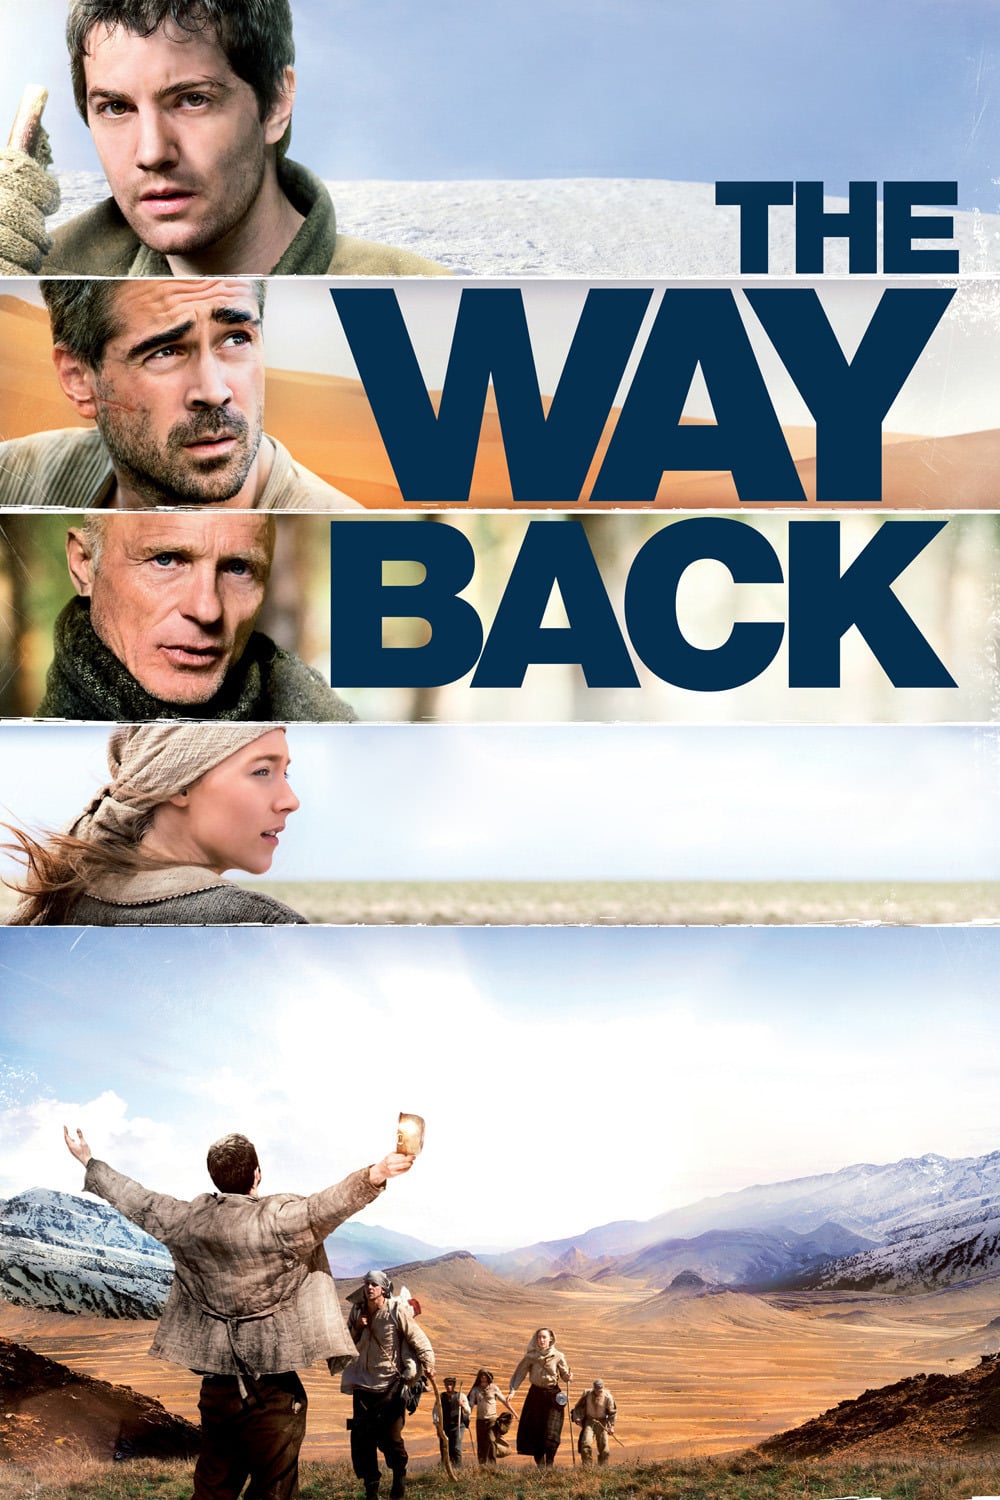 Poster for the movie "The Way Back"